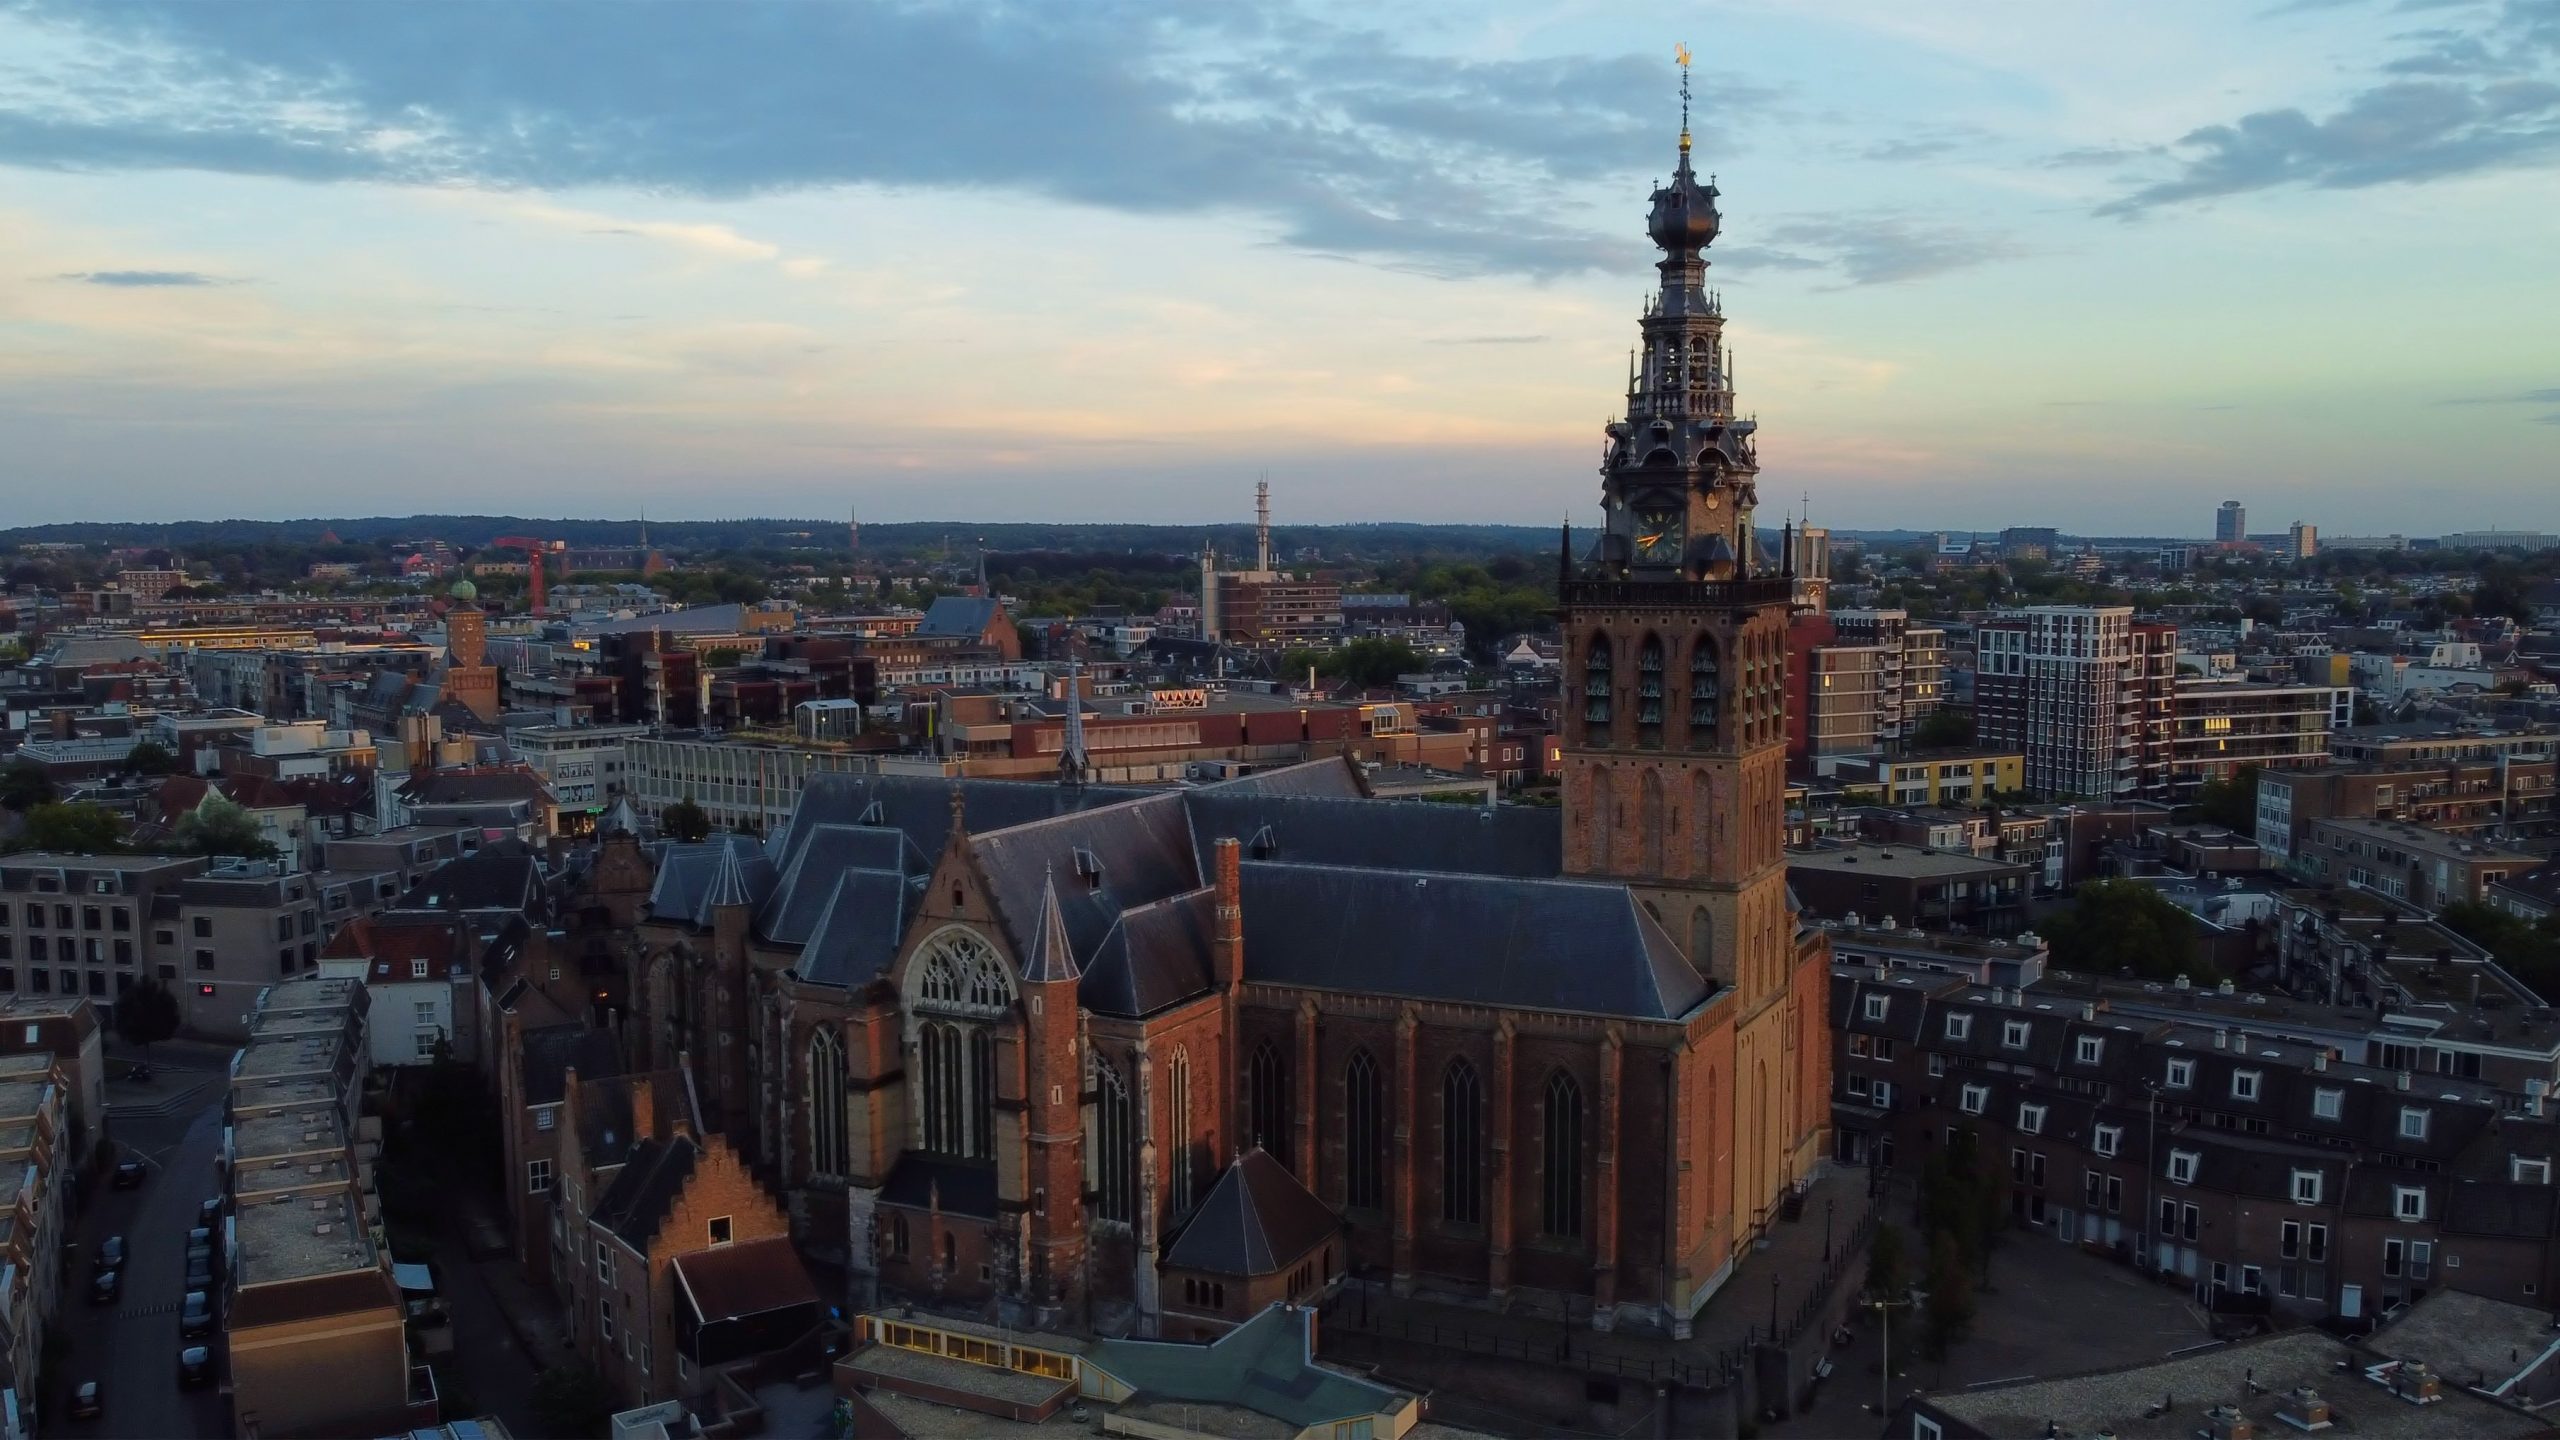 An aerial view of Nijmegen with a prominent church tower.